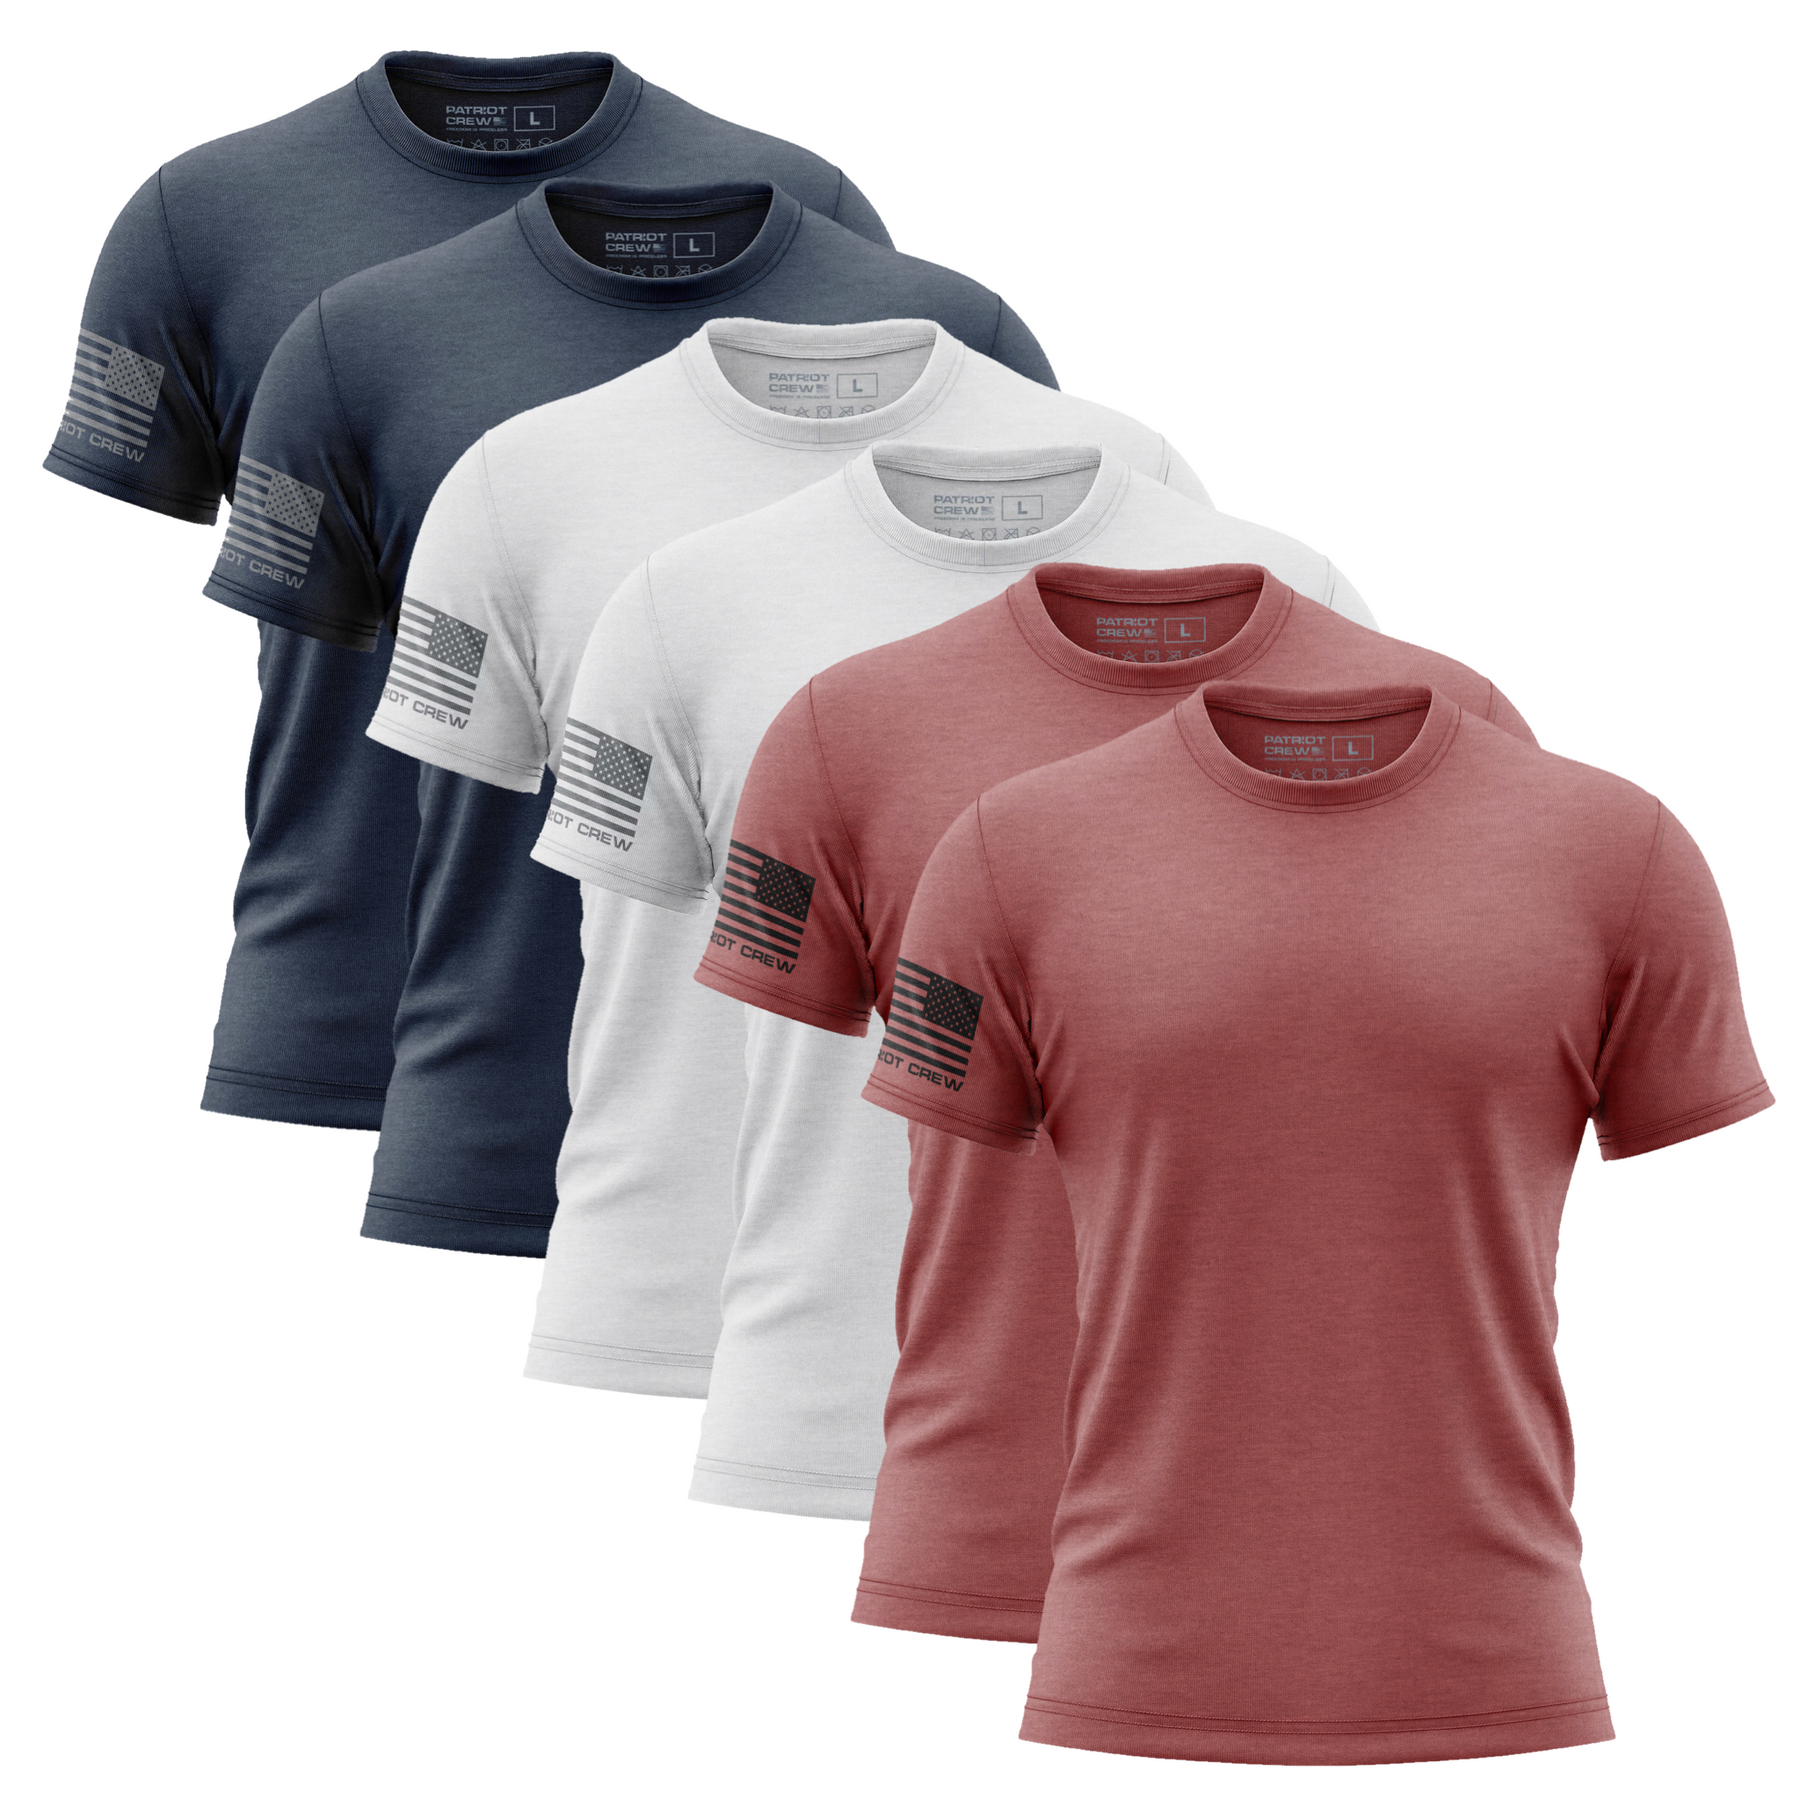 Red, White, & Blue T-Shirt (6 Pack)